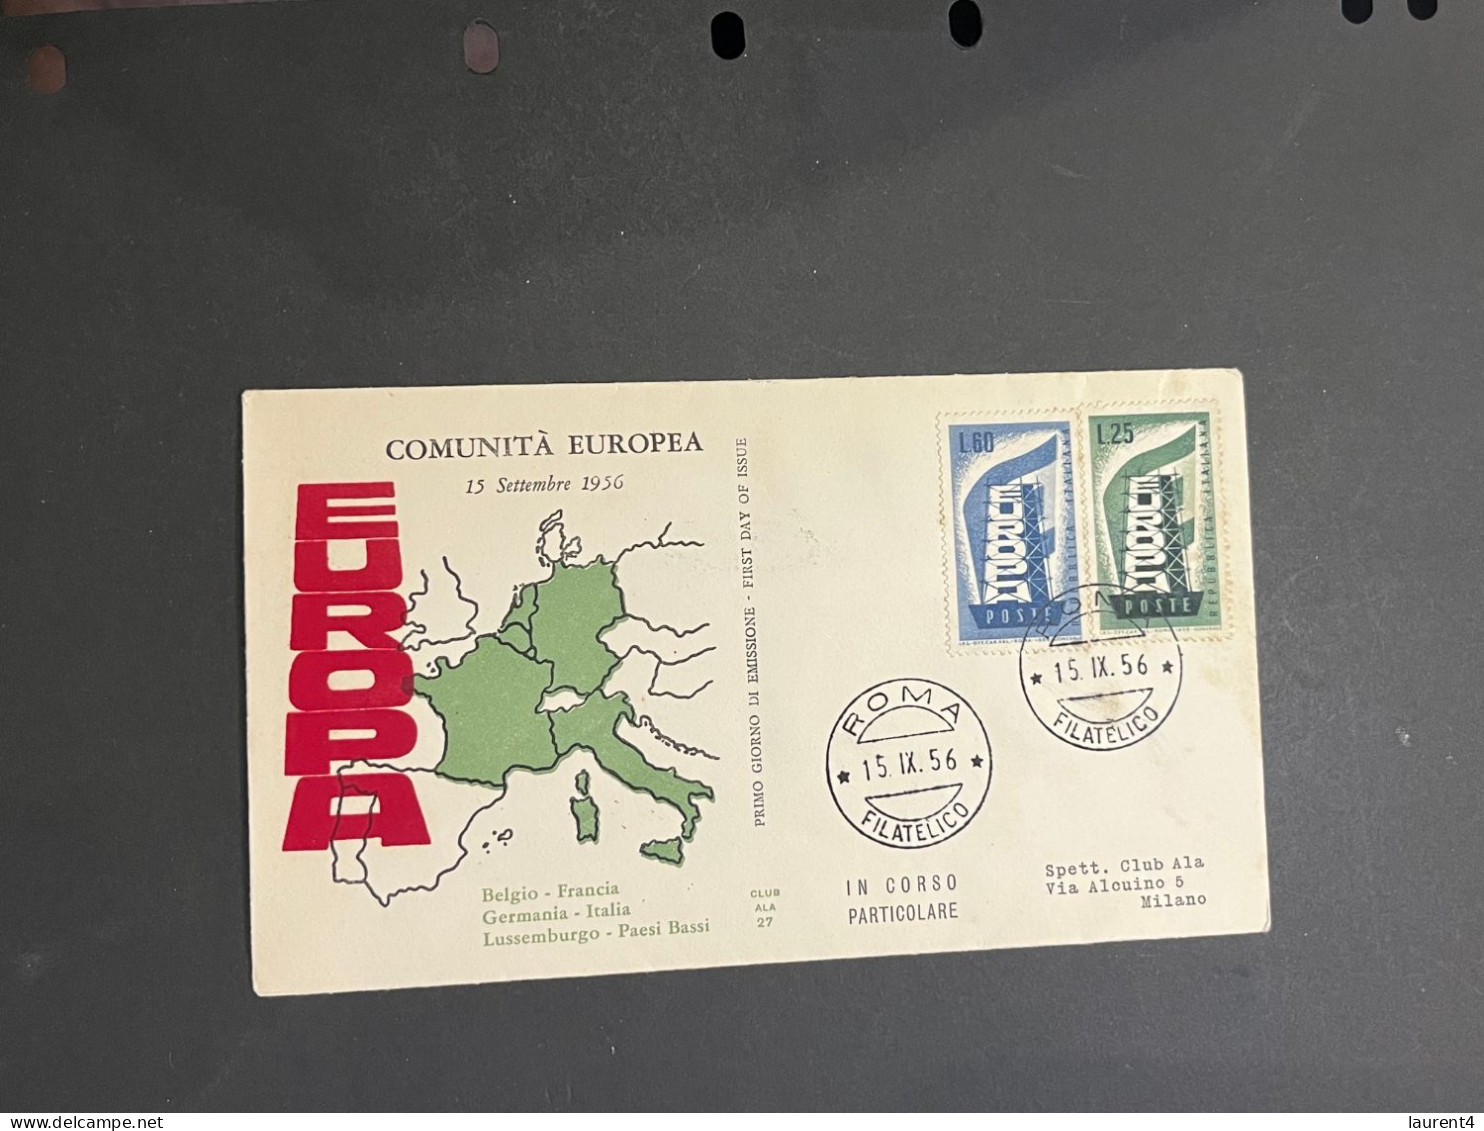 (1 Q 39) Italy EUROPA Stamp On FDC Cover With Pair Of 1956 EUROPA CEPT Stamp - 1956